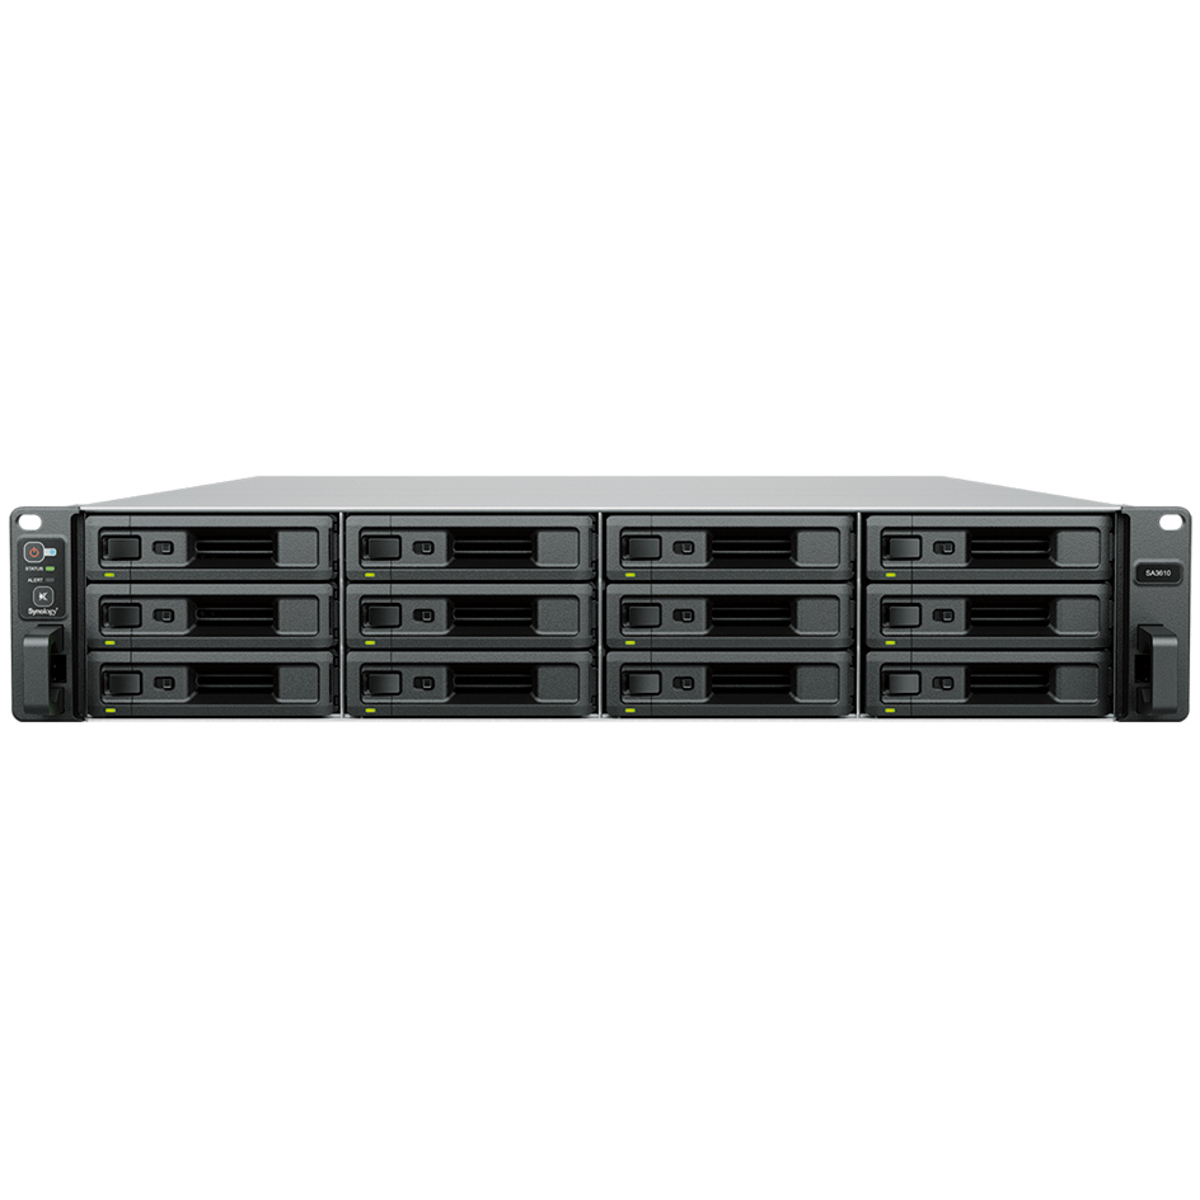 Synology RackStation SA3610 72tb 12-Bay RackMount Large Business / Enterprise NAS - Network Attached Storage Device 9x8tb Synology Plus Series HAT3310-8T 3.5 7200rpm SATA 6Gb/s HDD NAS Class Drives Installed - Burn-In Tested RackStation SA3610